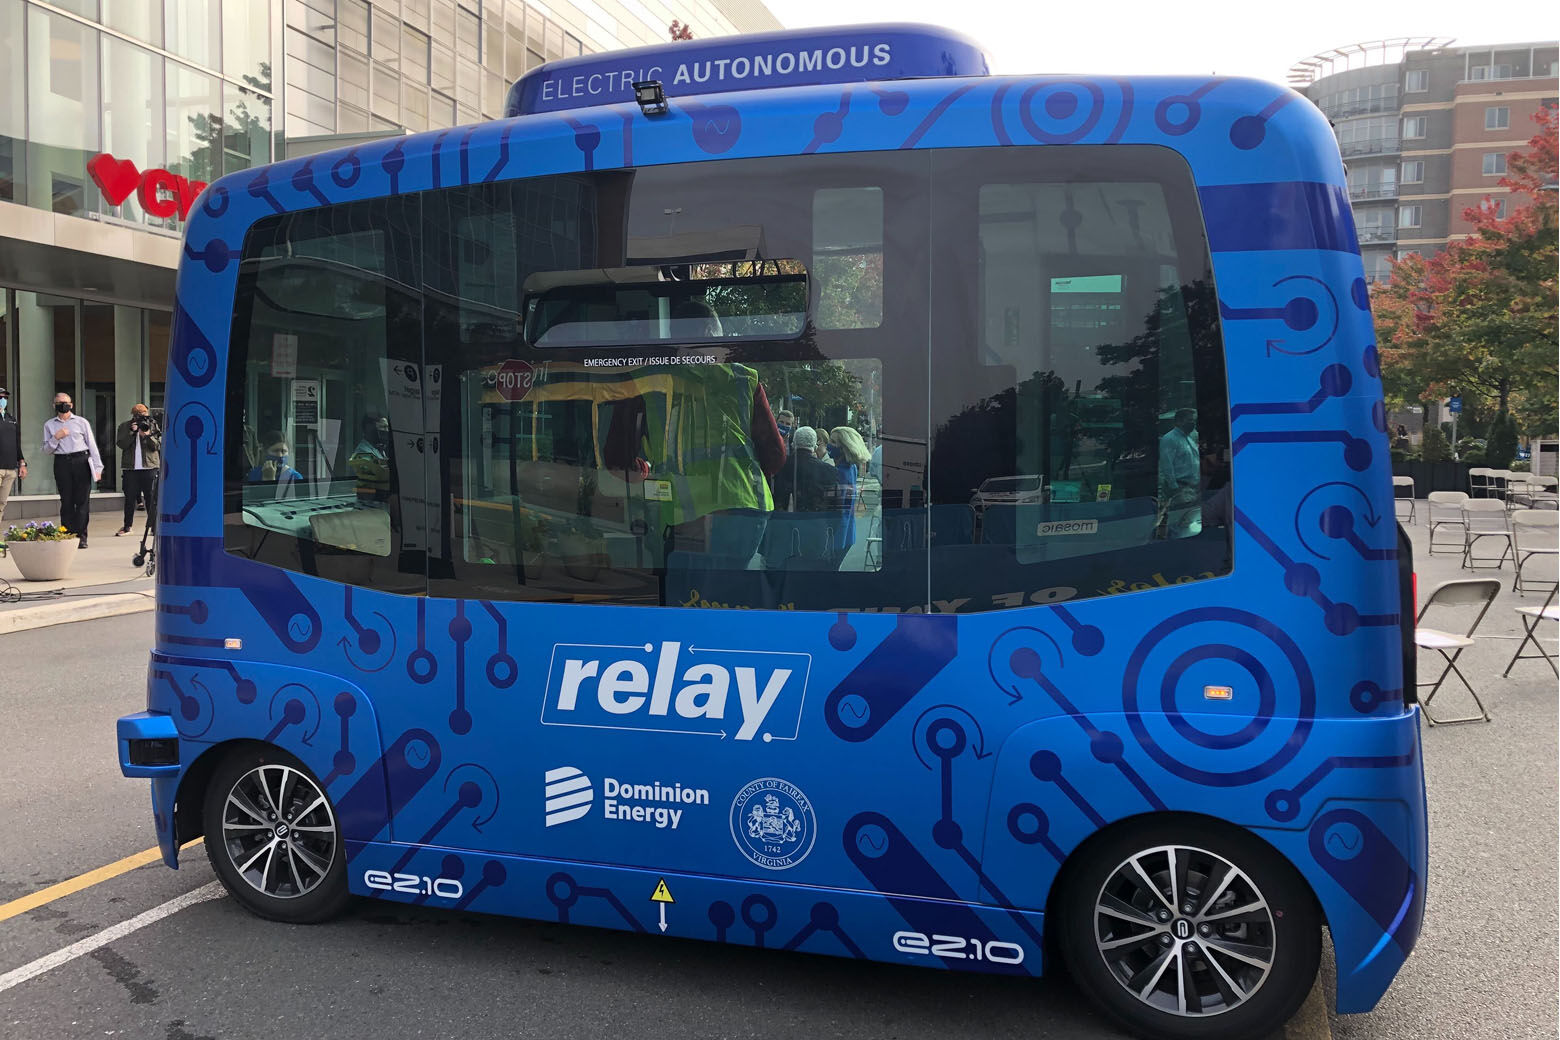 The autonomous electric shuttle "Relay" will carry passengers on a loop between the Dunn Loring Metro station to the popular shopping and living community in Merrifield, just outside the Capital Beltway. (WTOP/Nick Iannelli)